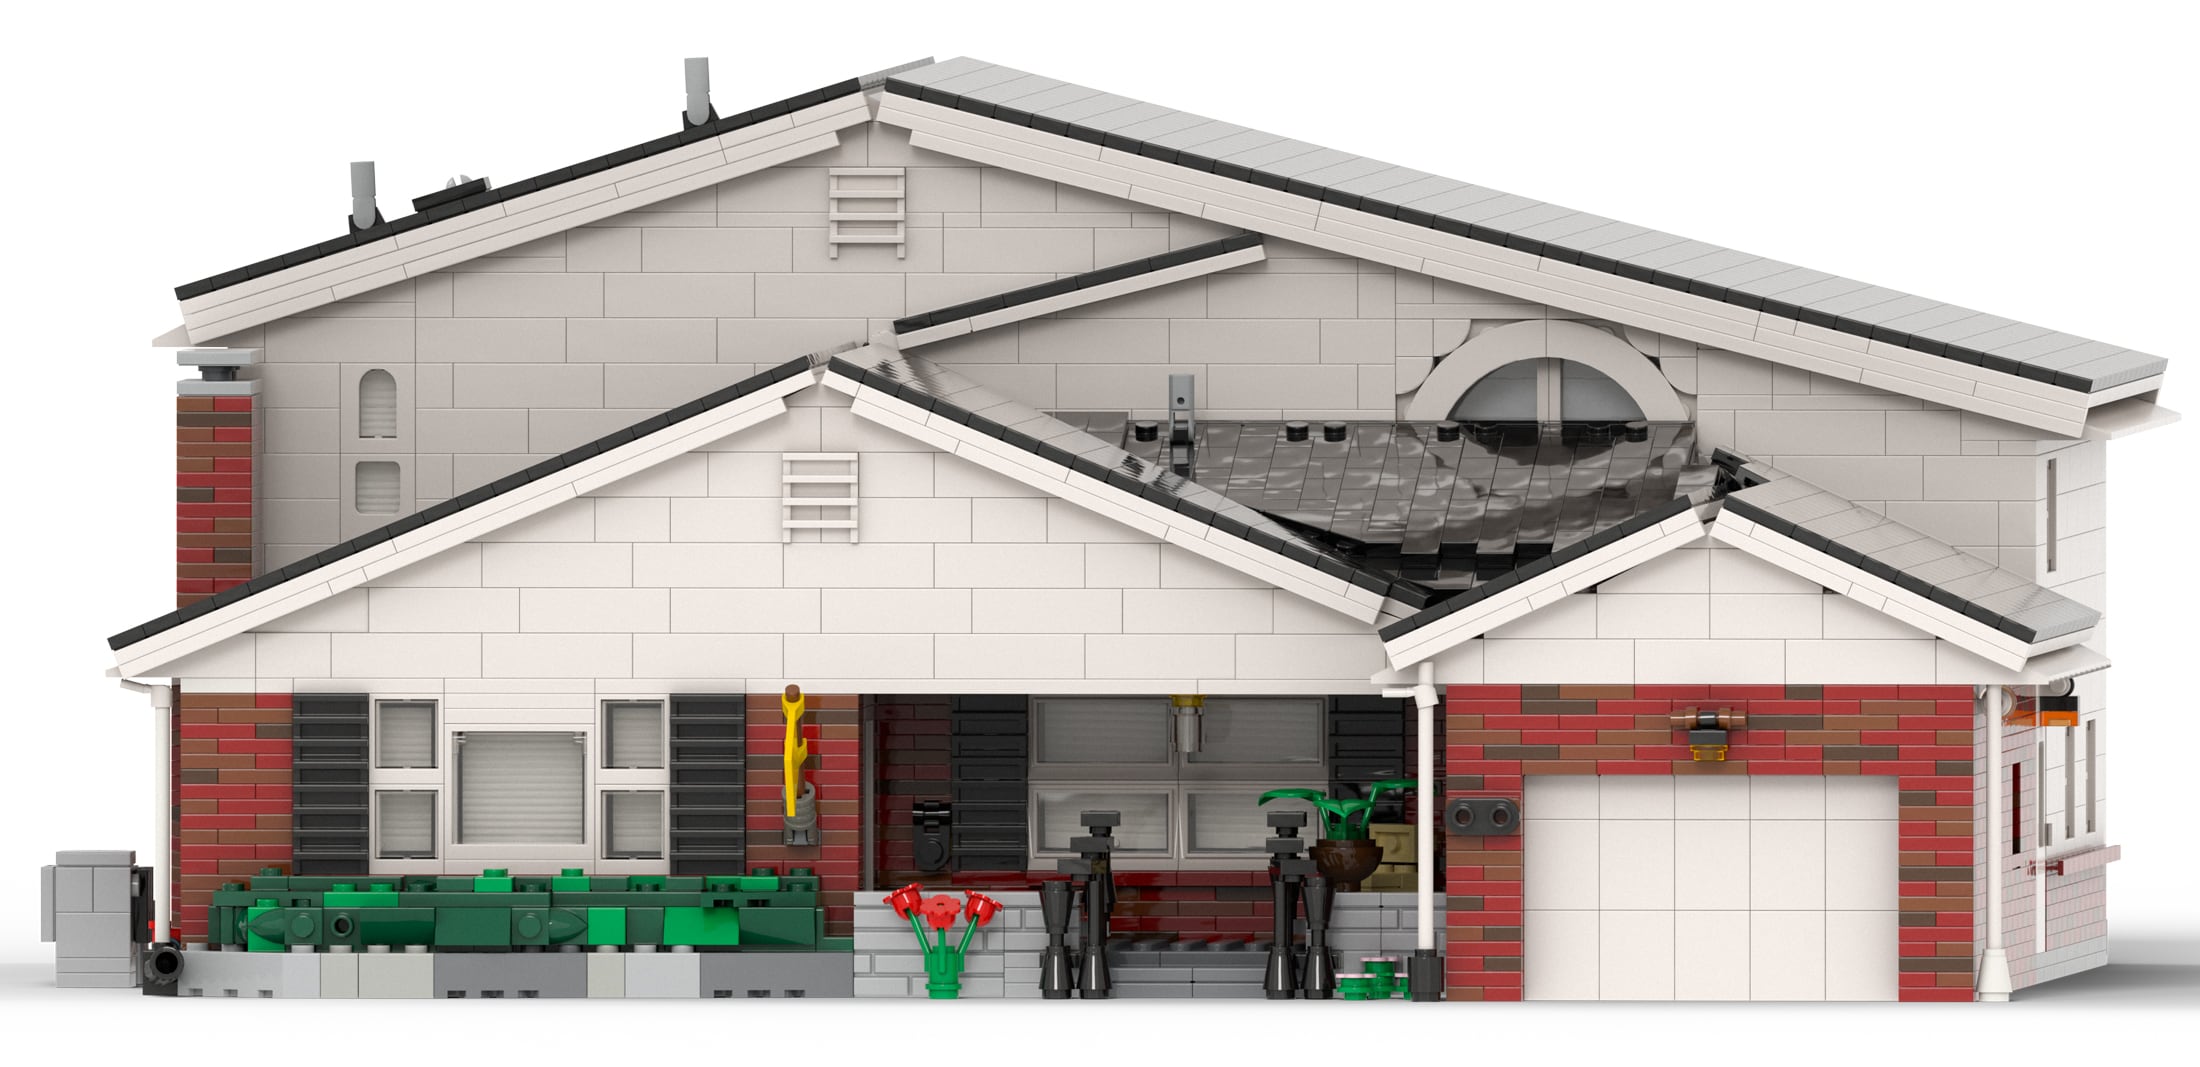 Rendering of a house made of LEGO